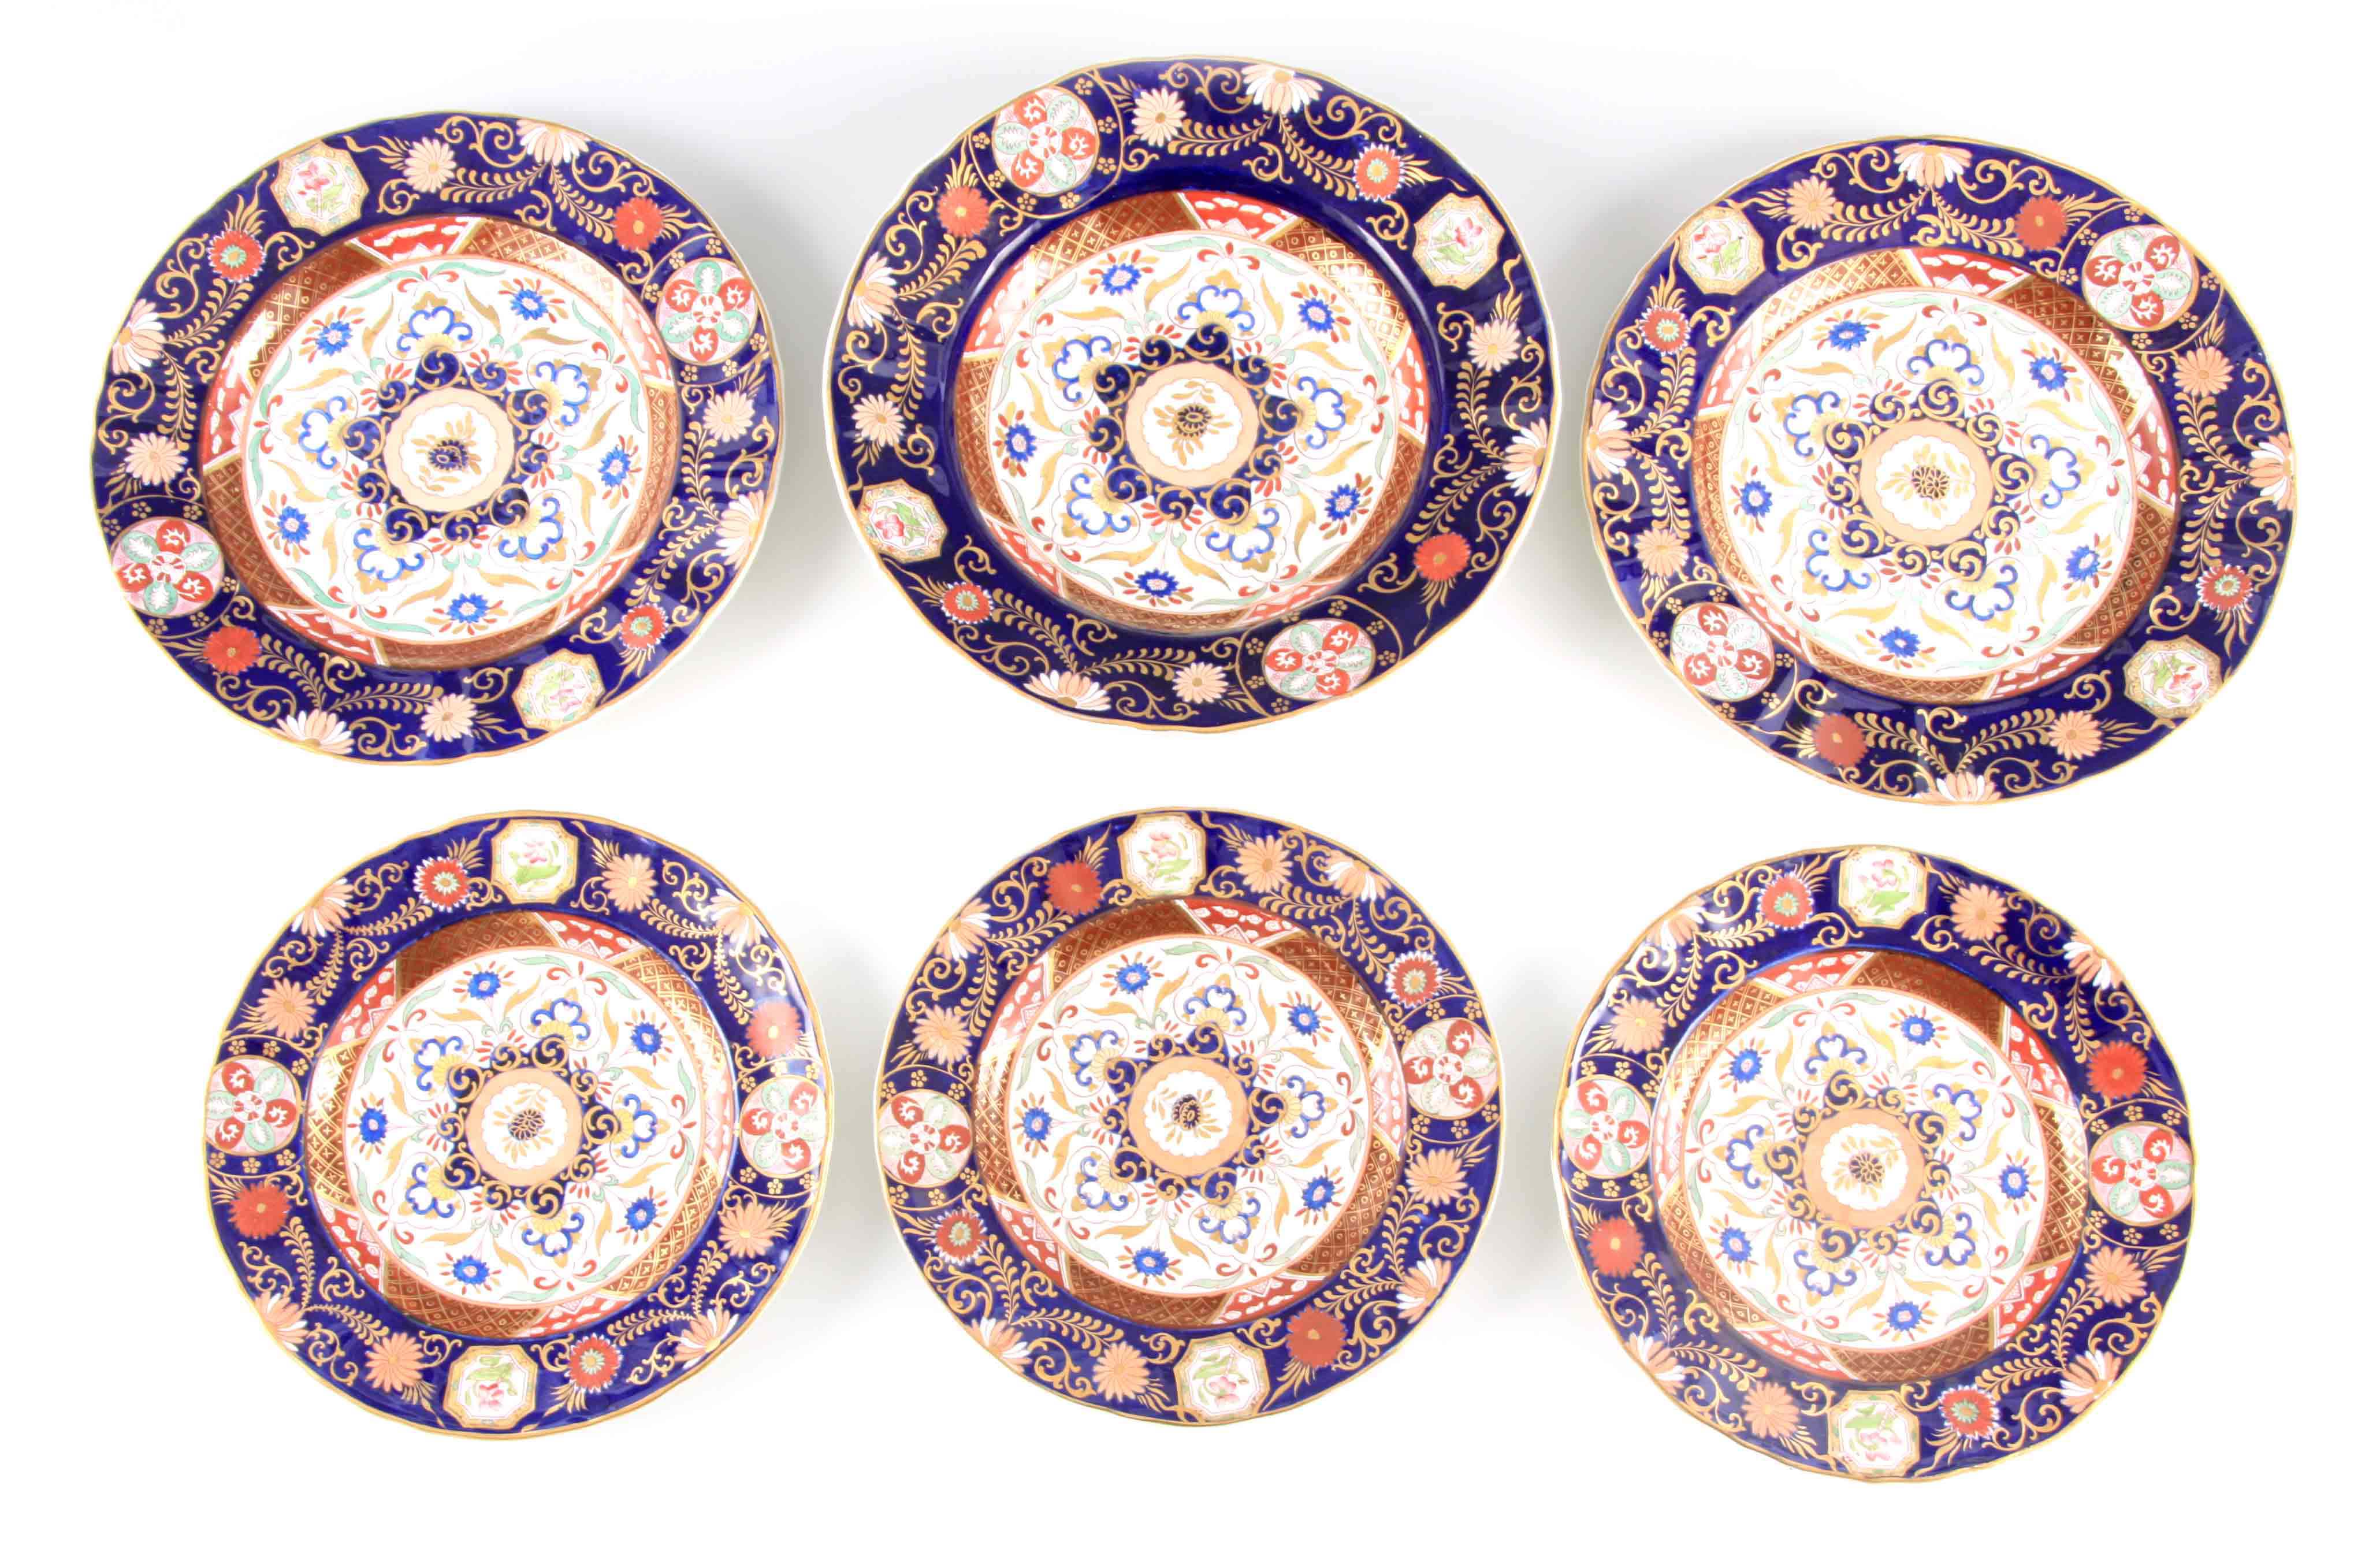 A 19TH CENTURY ASHWORTH BROs REAL IRONSTONE CHINA PART DINNER SERVICE comprising five plates of